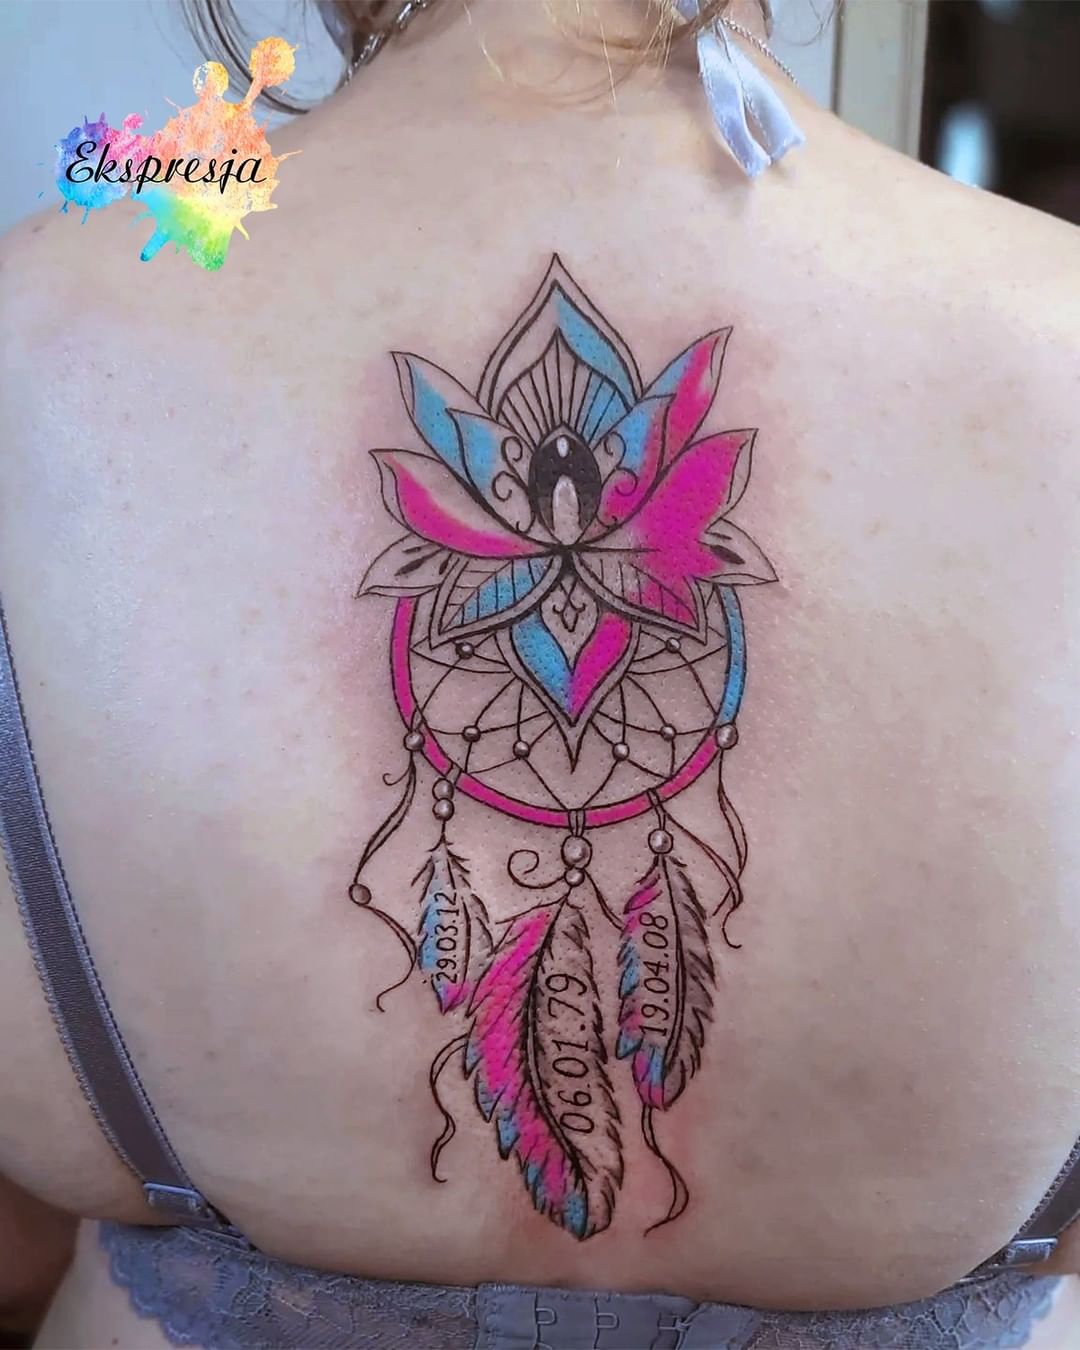 If you’re someone who likes tribal elements this tattoo will suit you. It will show your love for patterns and different colors, along with your retro boho side!